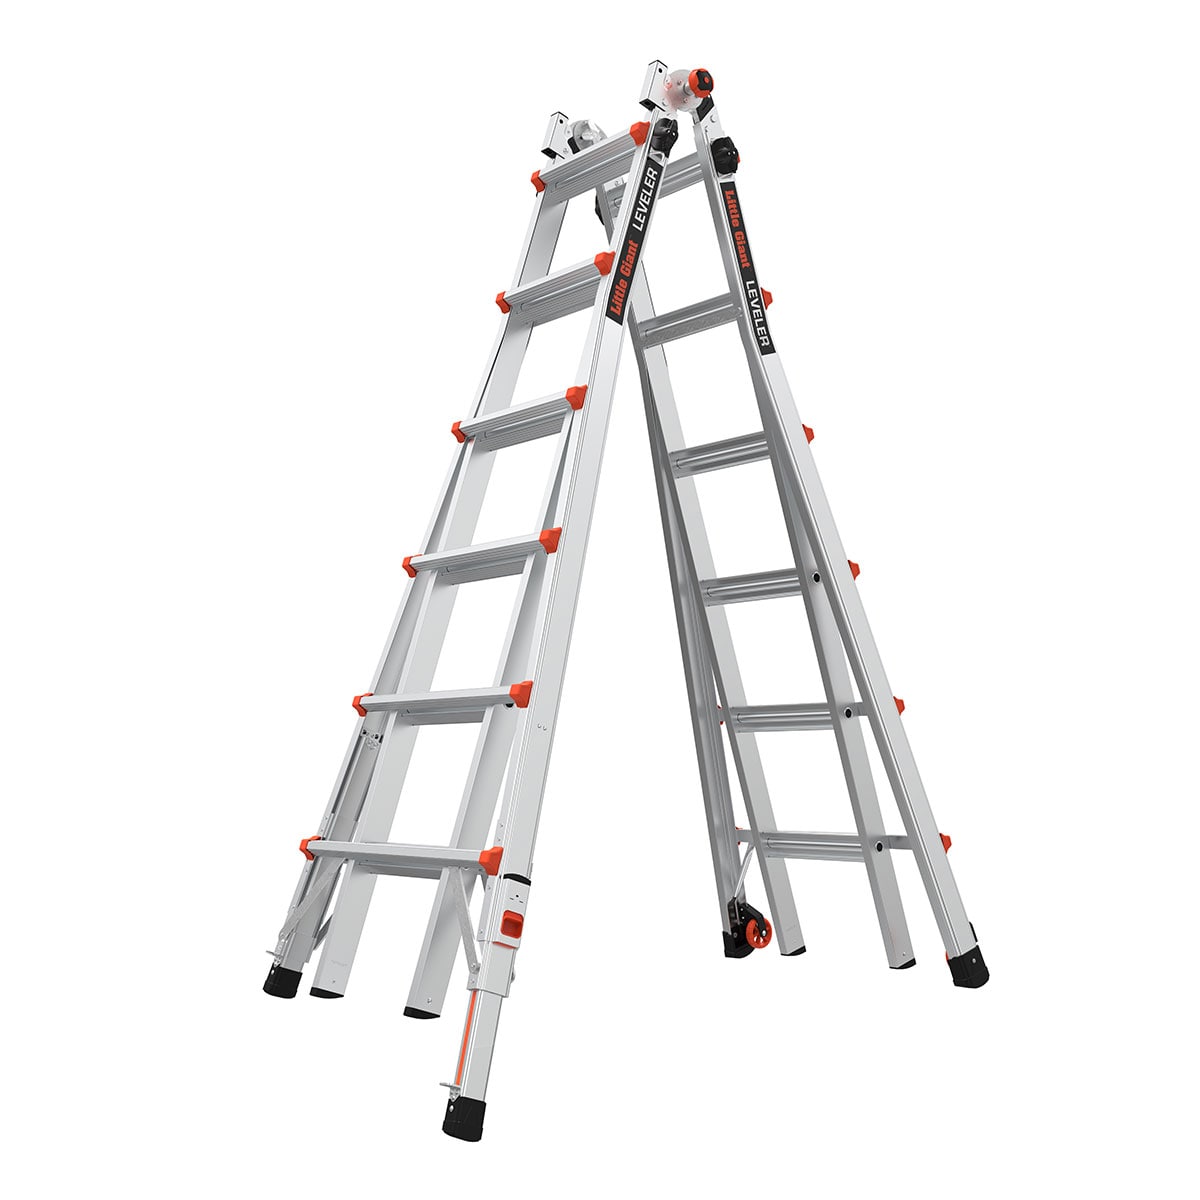 Little Giant Ladders Leveler M26 with Leg Levelers and AirDeck Ports 26-ft Reach Type 1a- 300-lb Load Capacity Telescoping Multi-Position Ladder -  16926-803